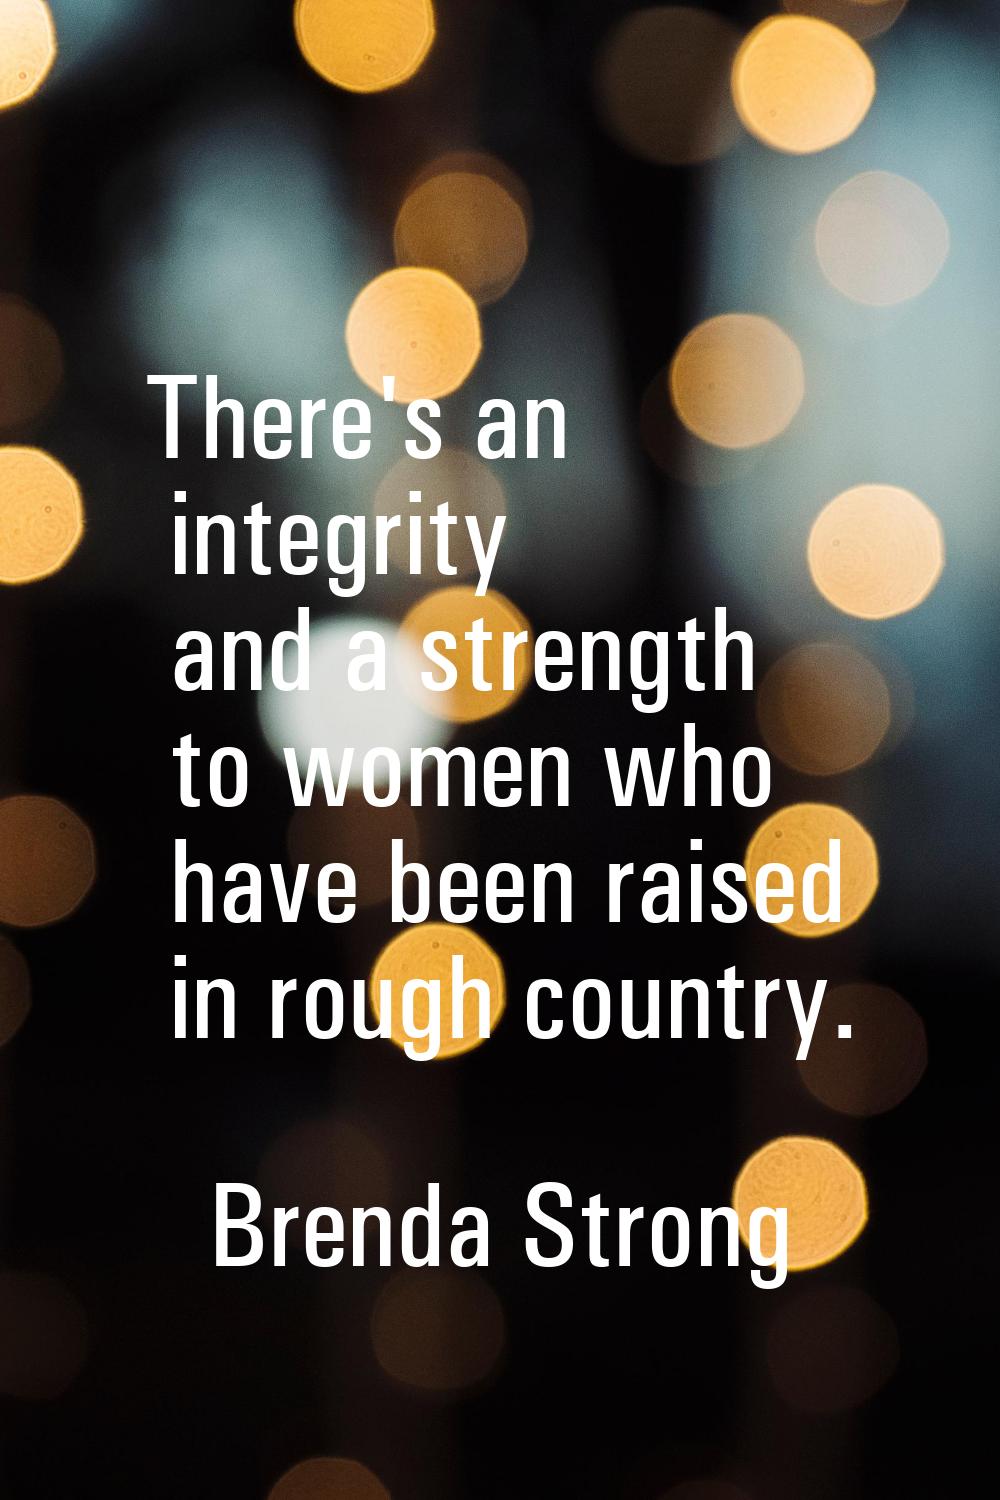 There's an integrity and a strength to women who have been raised in rough country.